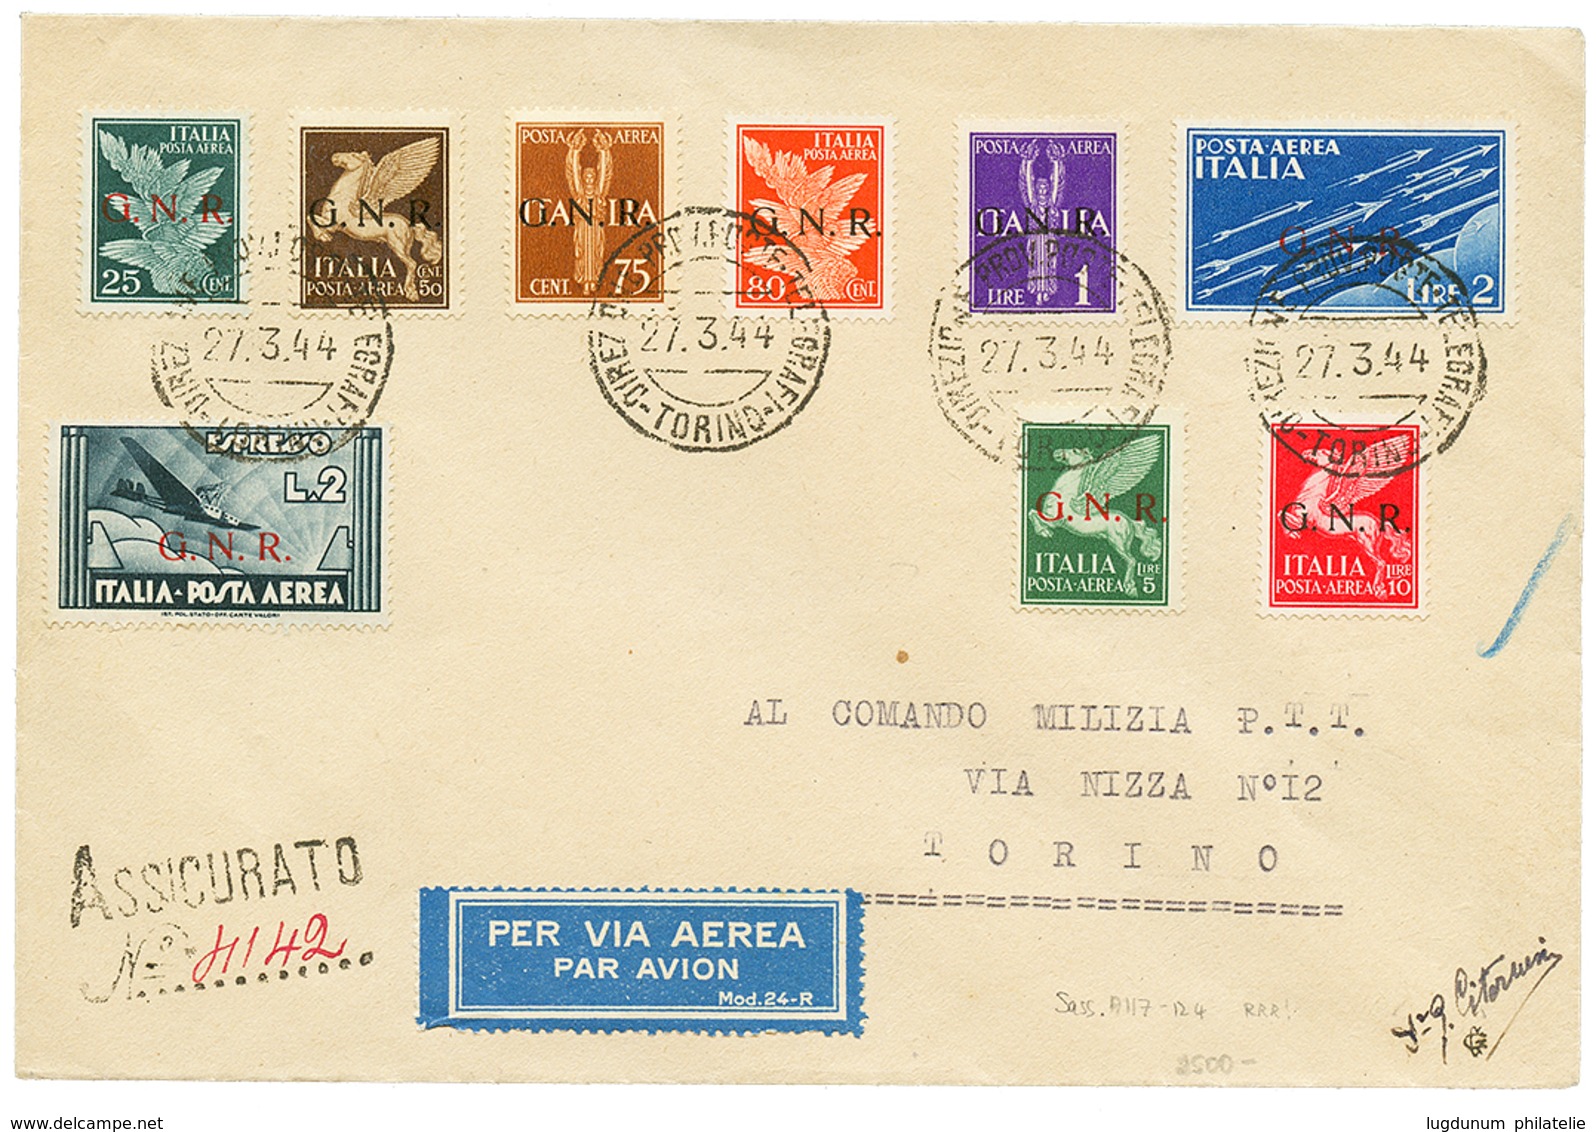 1186 G.N.R : 1944 5c To 2L Overprint G.N.R On REGISTERED AIRMAIL Envelope From TORINO. Vvf. - Unclassified